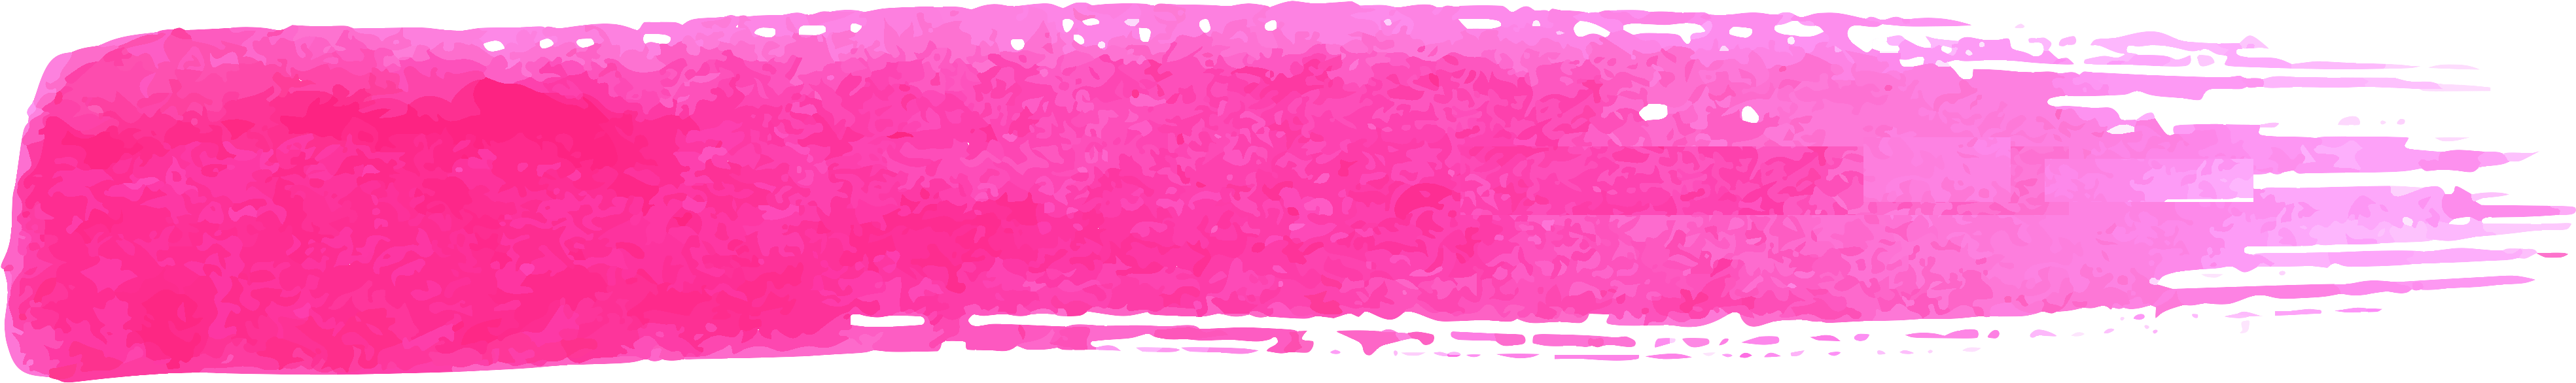 Paint Stroke Png Tumblr - Pink Brush Stroke Png (4500x1000), Png Download